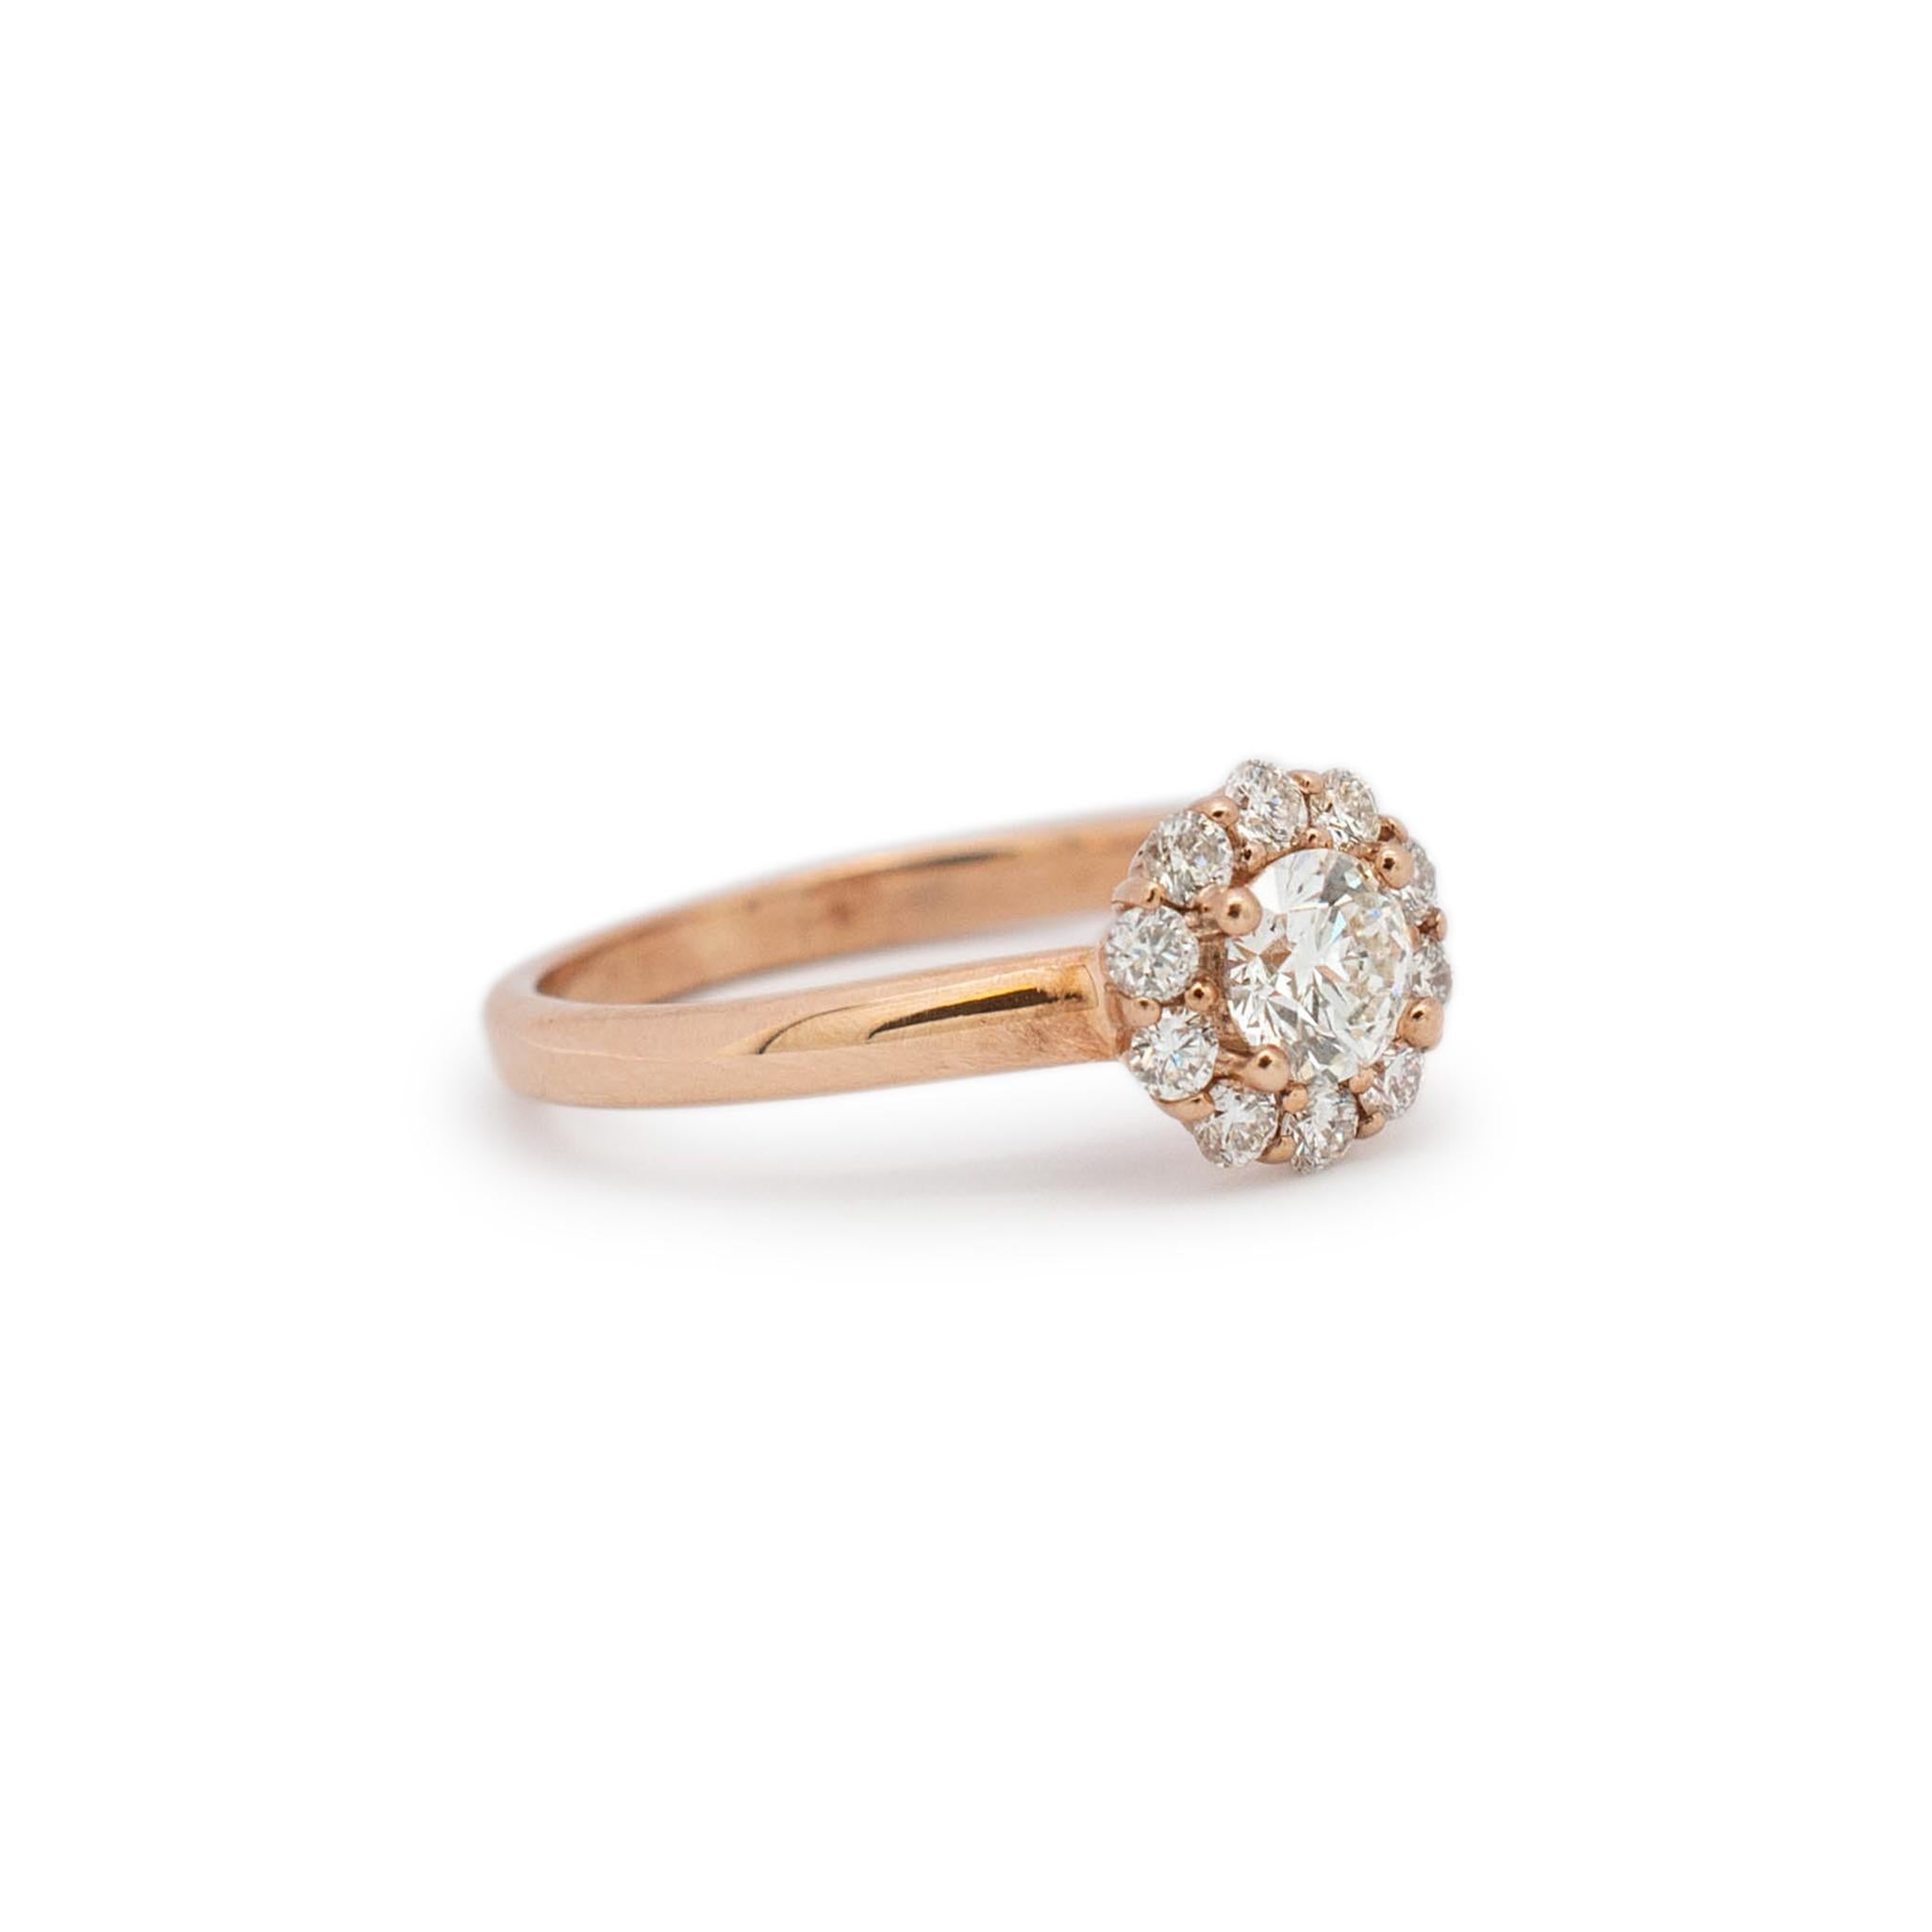 Ladies 14K Rose Gold Flower Shaped Halo Diamond Engagement Ring In Excellent Condition For Sale In Houston, TX